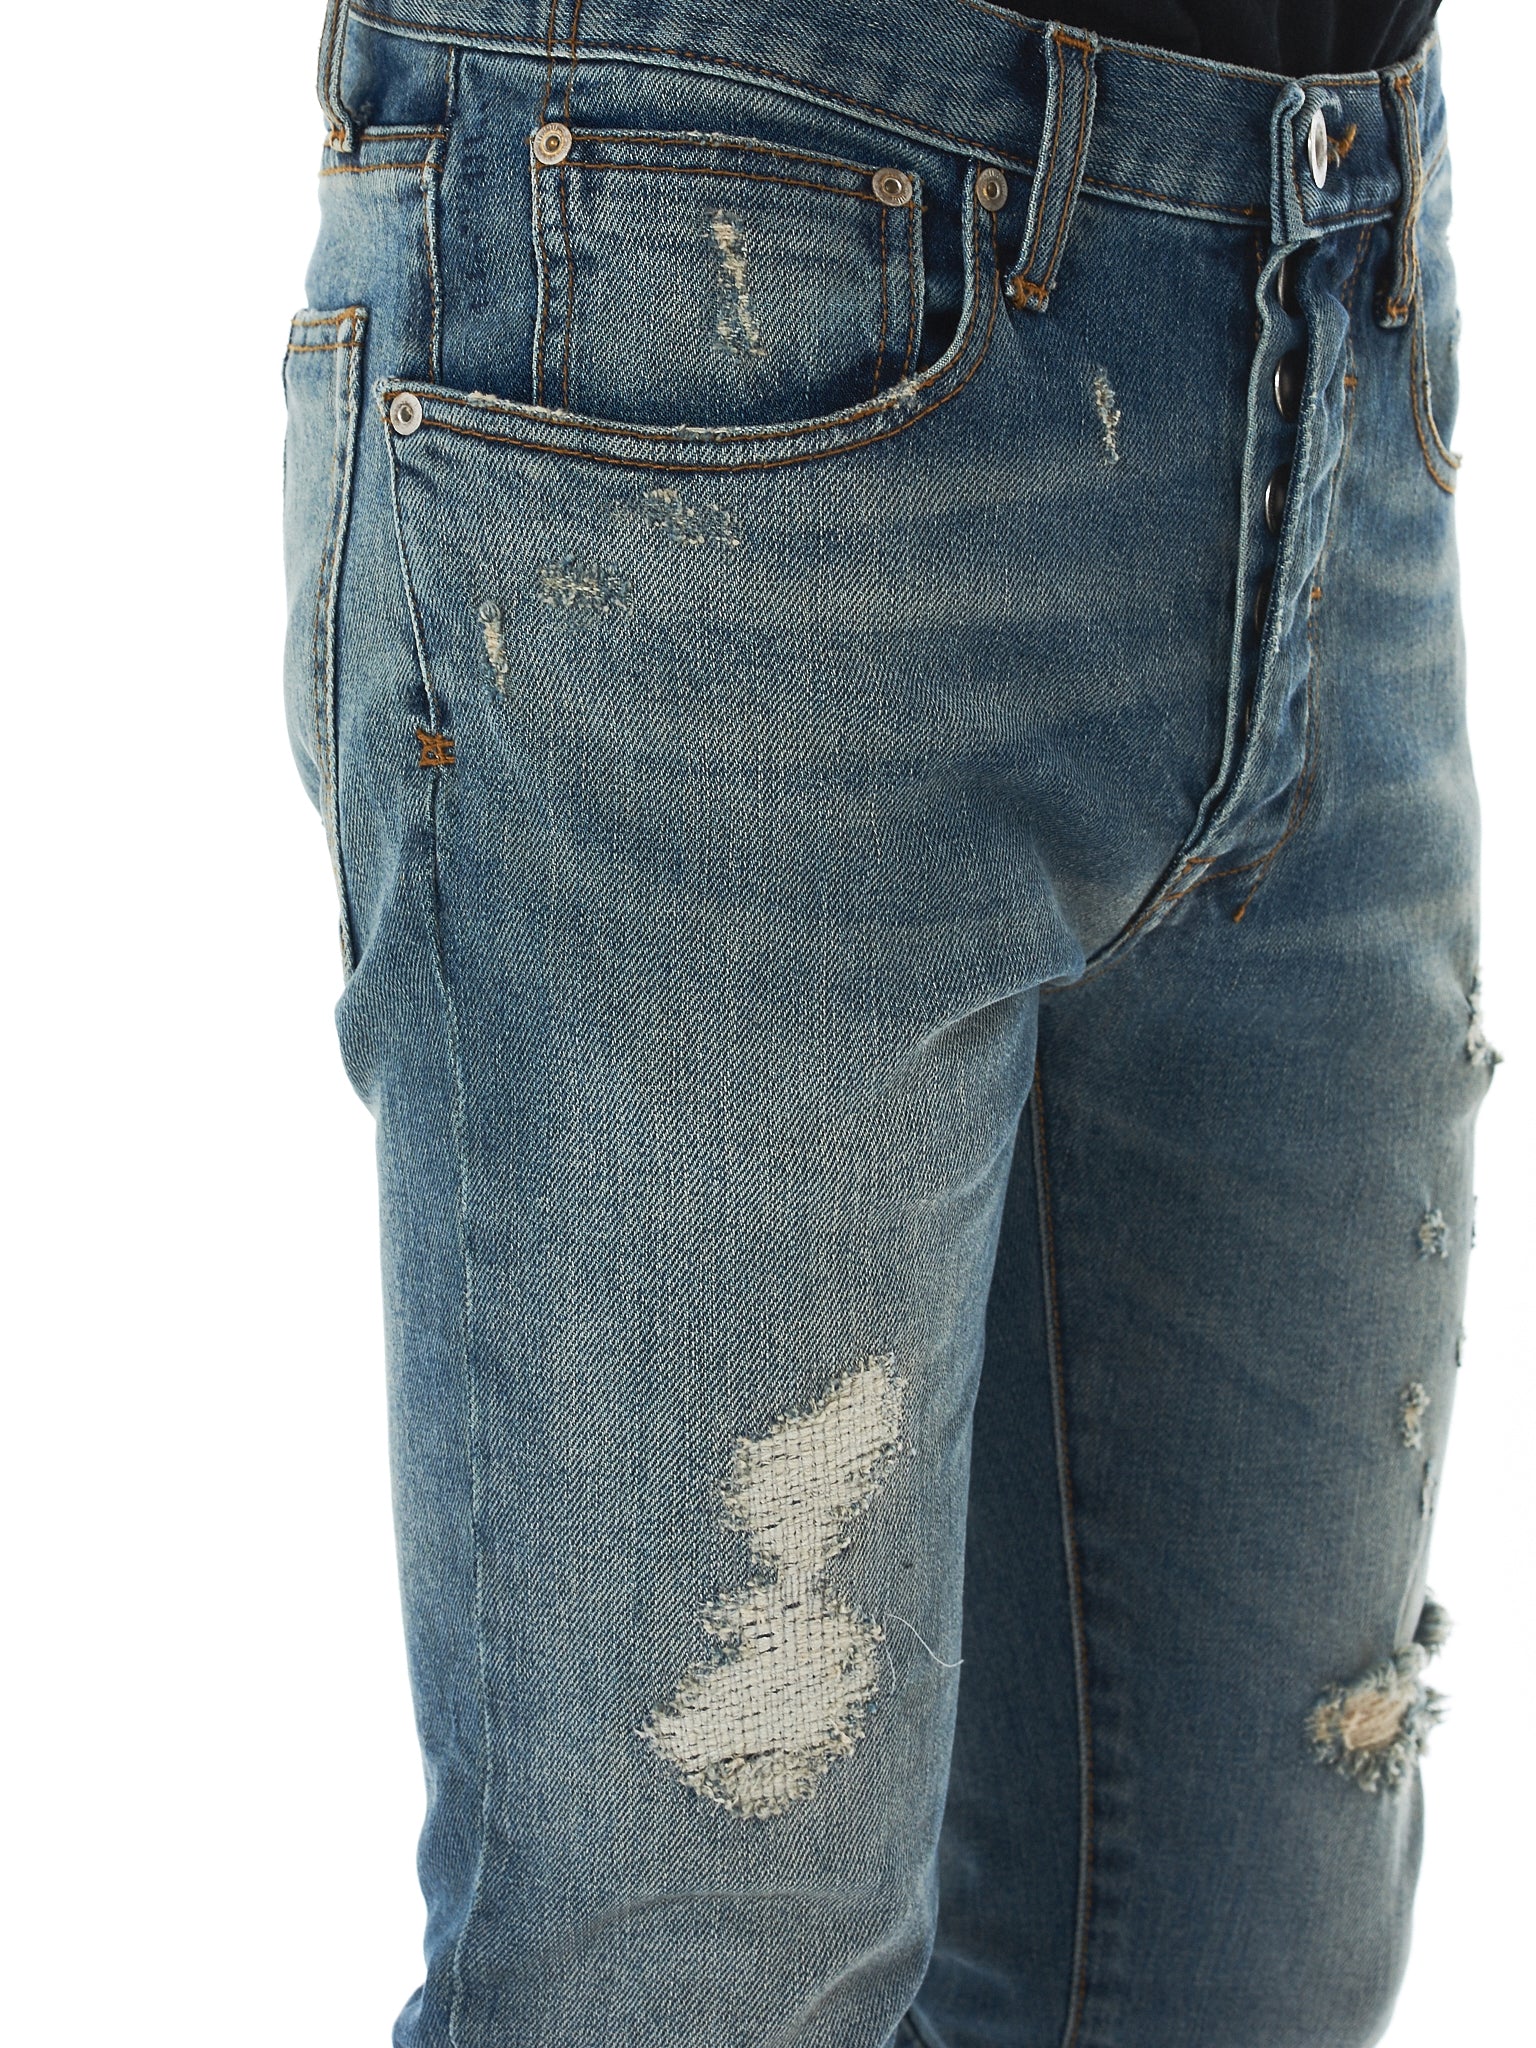 Unravel Distressed Jeans - Hlorenzo Detail 2